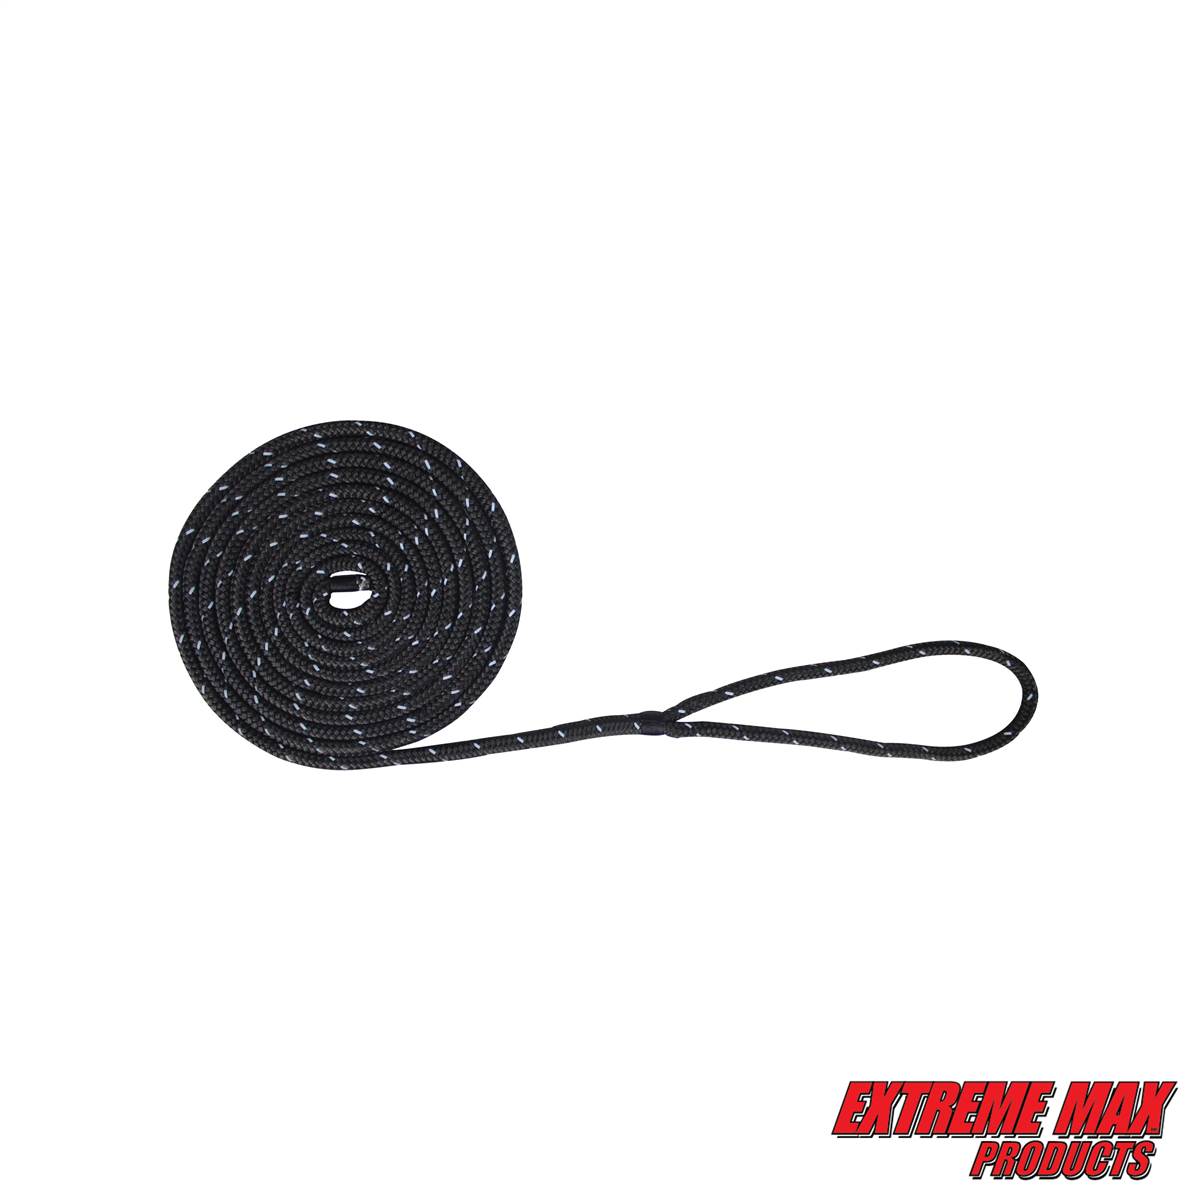 3/8 x 15 Extreme Max 3006.2463 BoatTector Double Braid Nylon Dock Line Black w/ Reflective Tracer